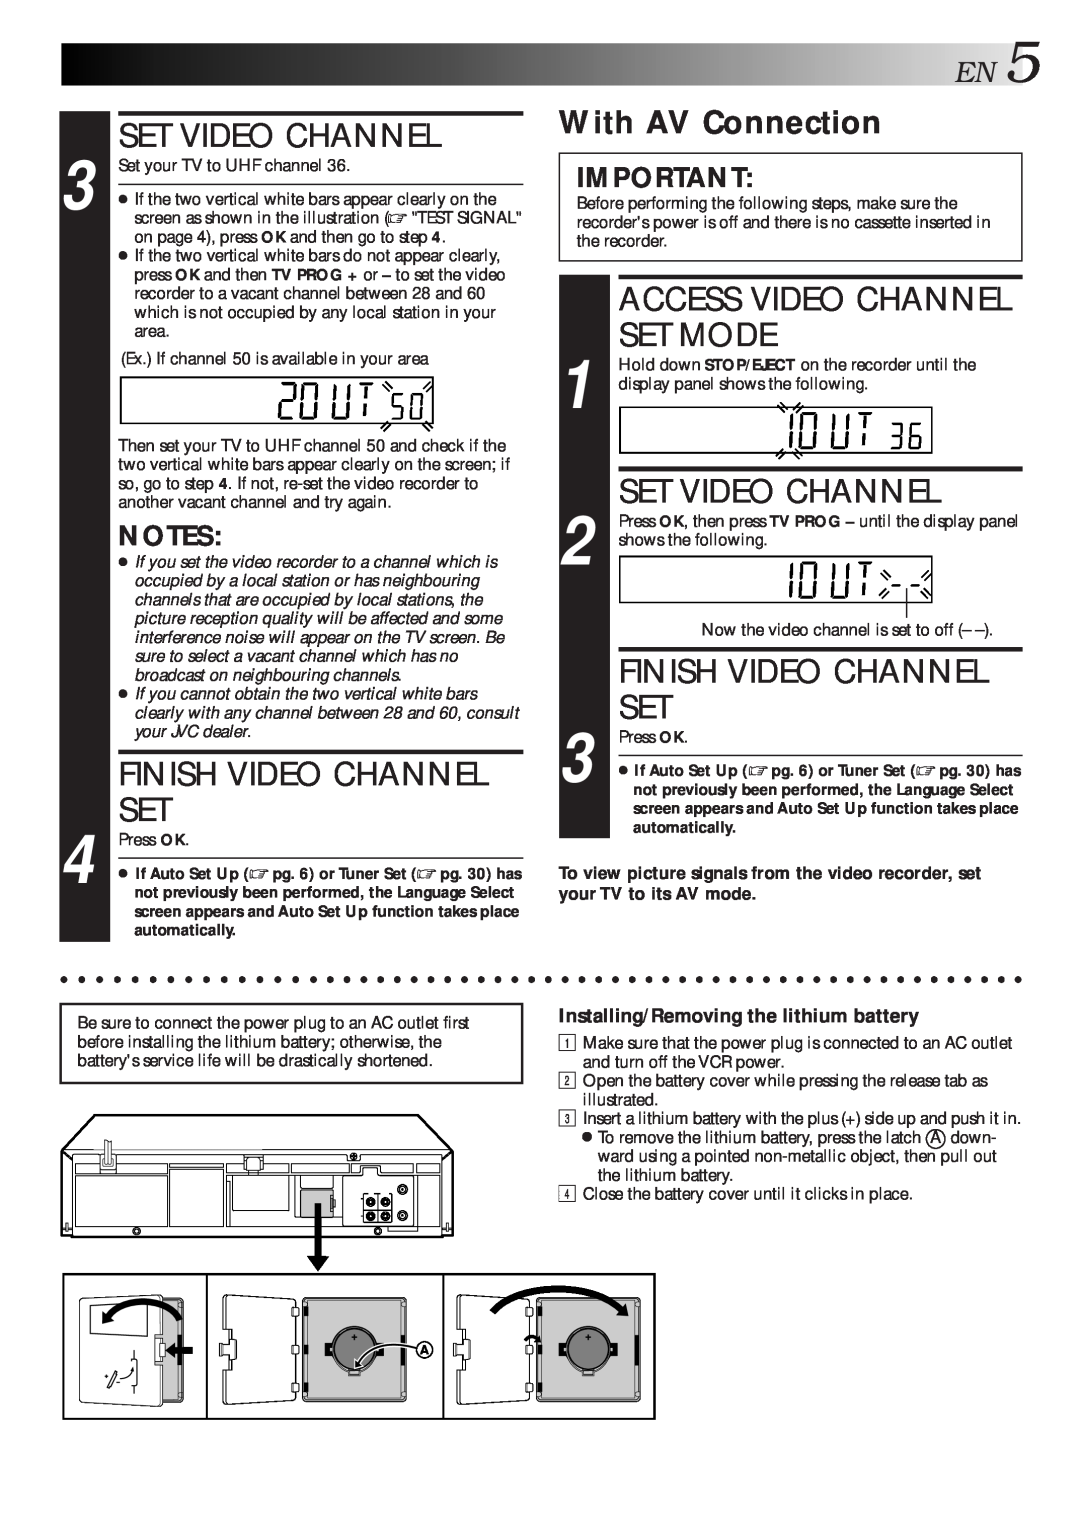 JVC HR-J461MS specifications Set Video Channel, Finish Video Channel Set, With AV Connection, Access Video Channel Set Mode 